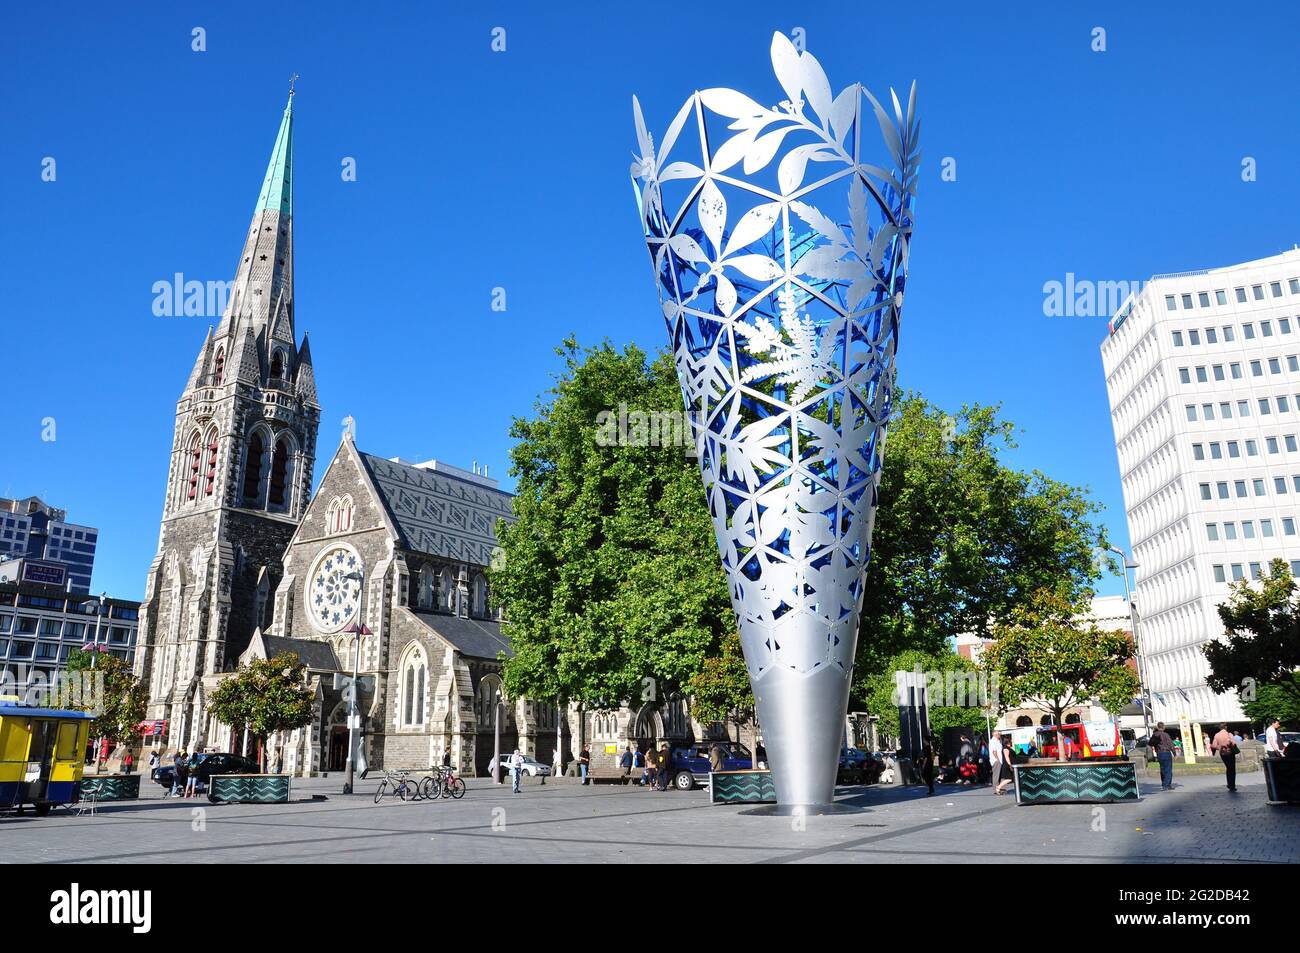 Christchurch, New Zealand - NOV 26, 2010: Chalice sculpture by Neil Dawson and Christchurch Anglican cathedral in in Cathedral Square Stock Photo